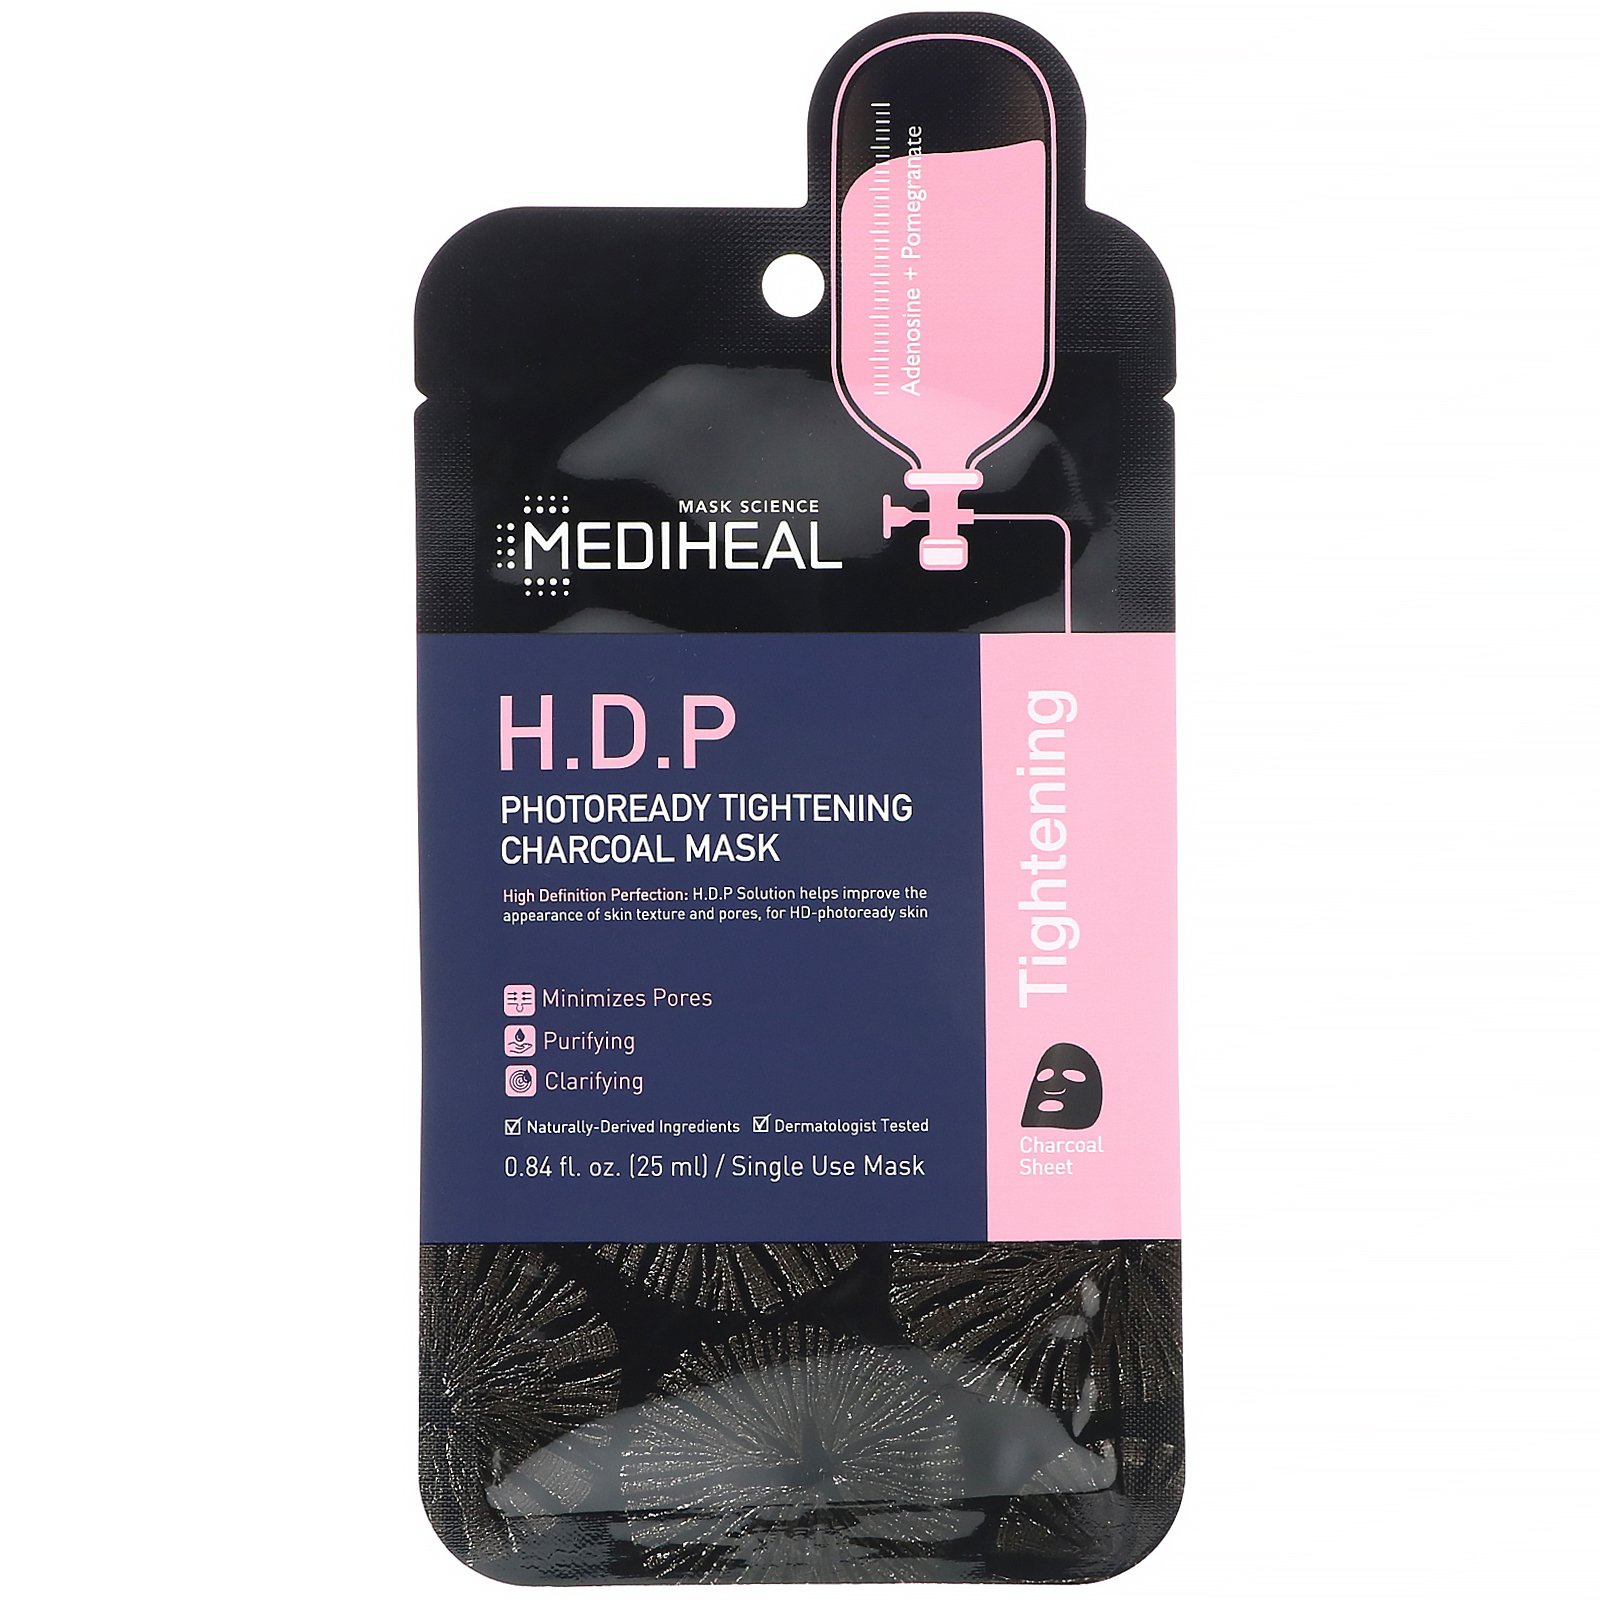 Mediheal H.D.P Photoready Tightening Charcoal Mask